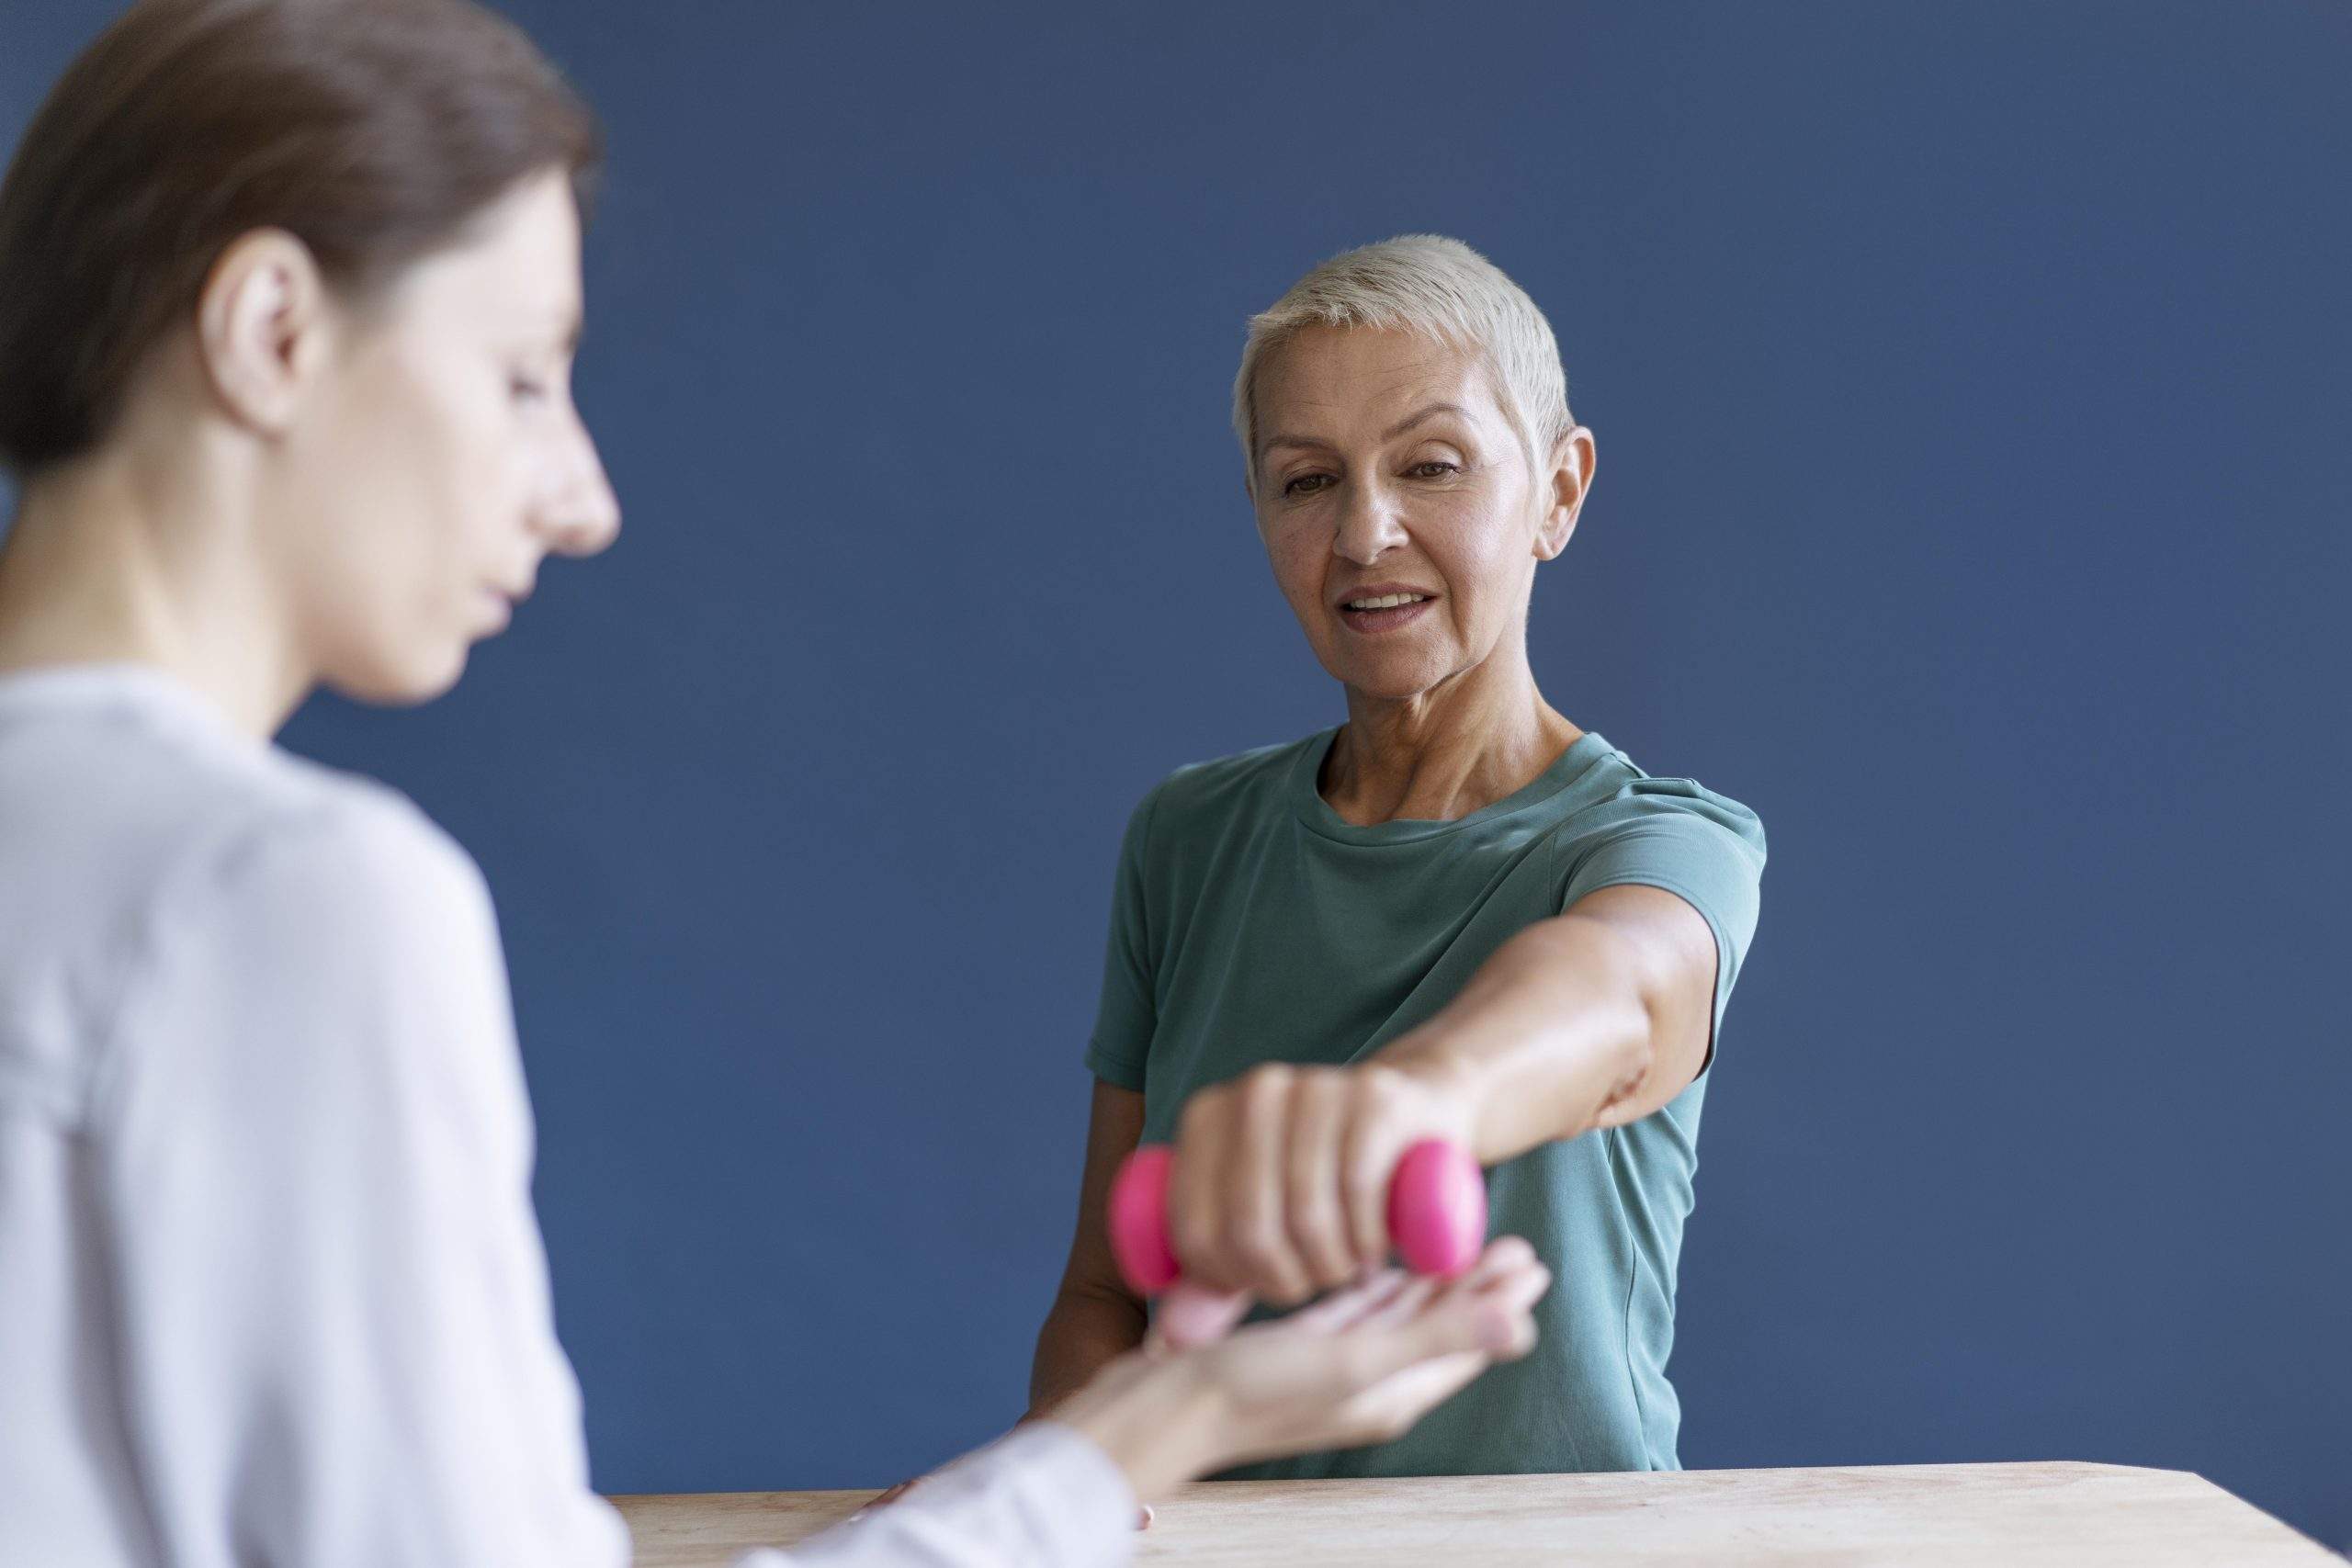 Physical Therapy for breast cancer patients after treatment